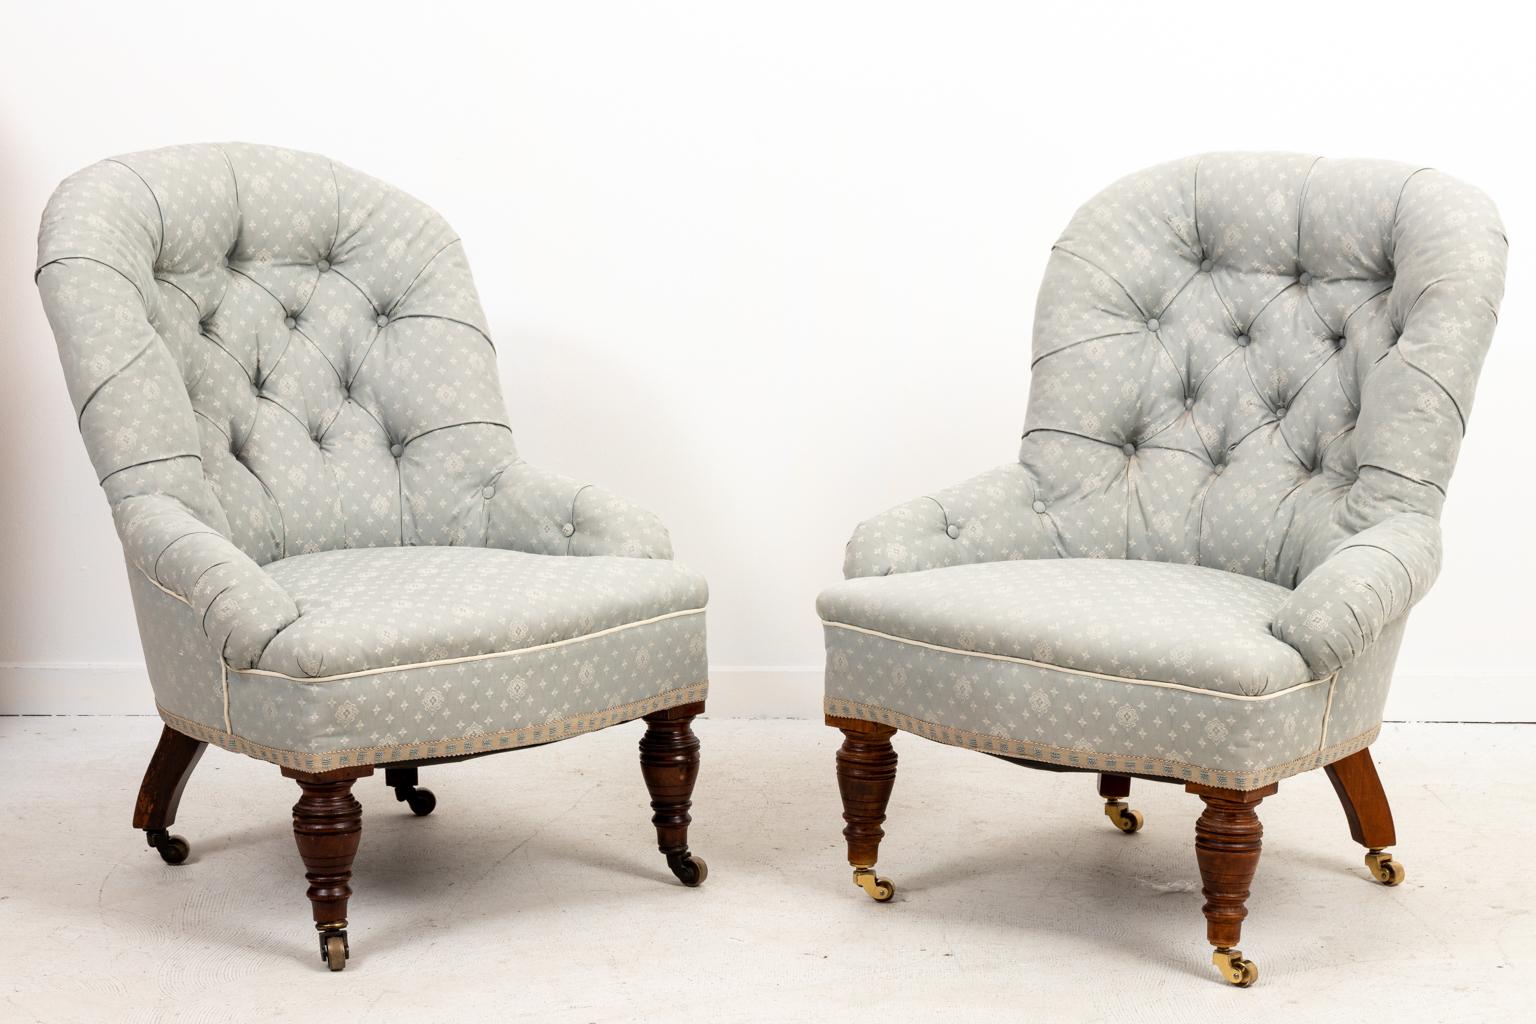 Circa 1980s pair of vintage tufted English style slipper chairs with turned legs on castors. Please note of wear consistent with age including minor fading.